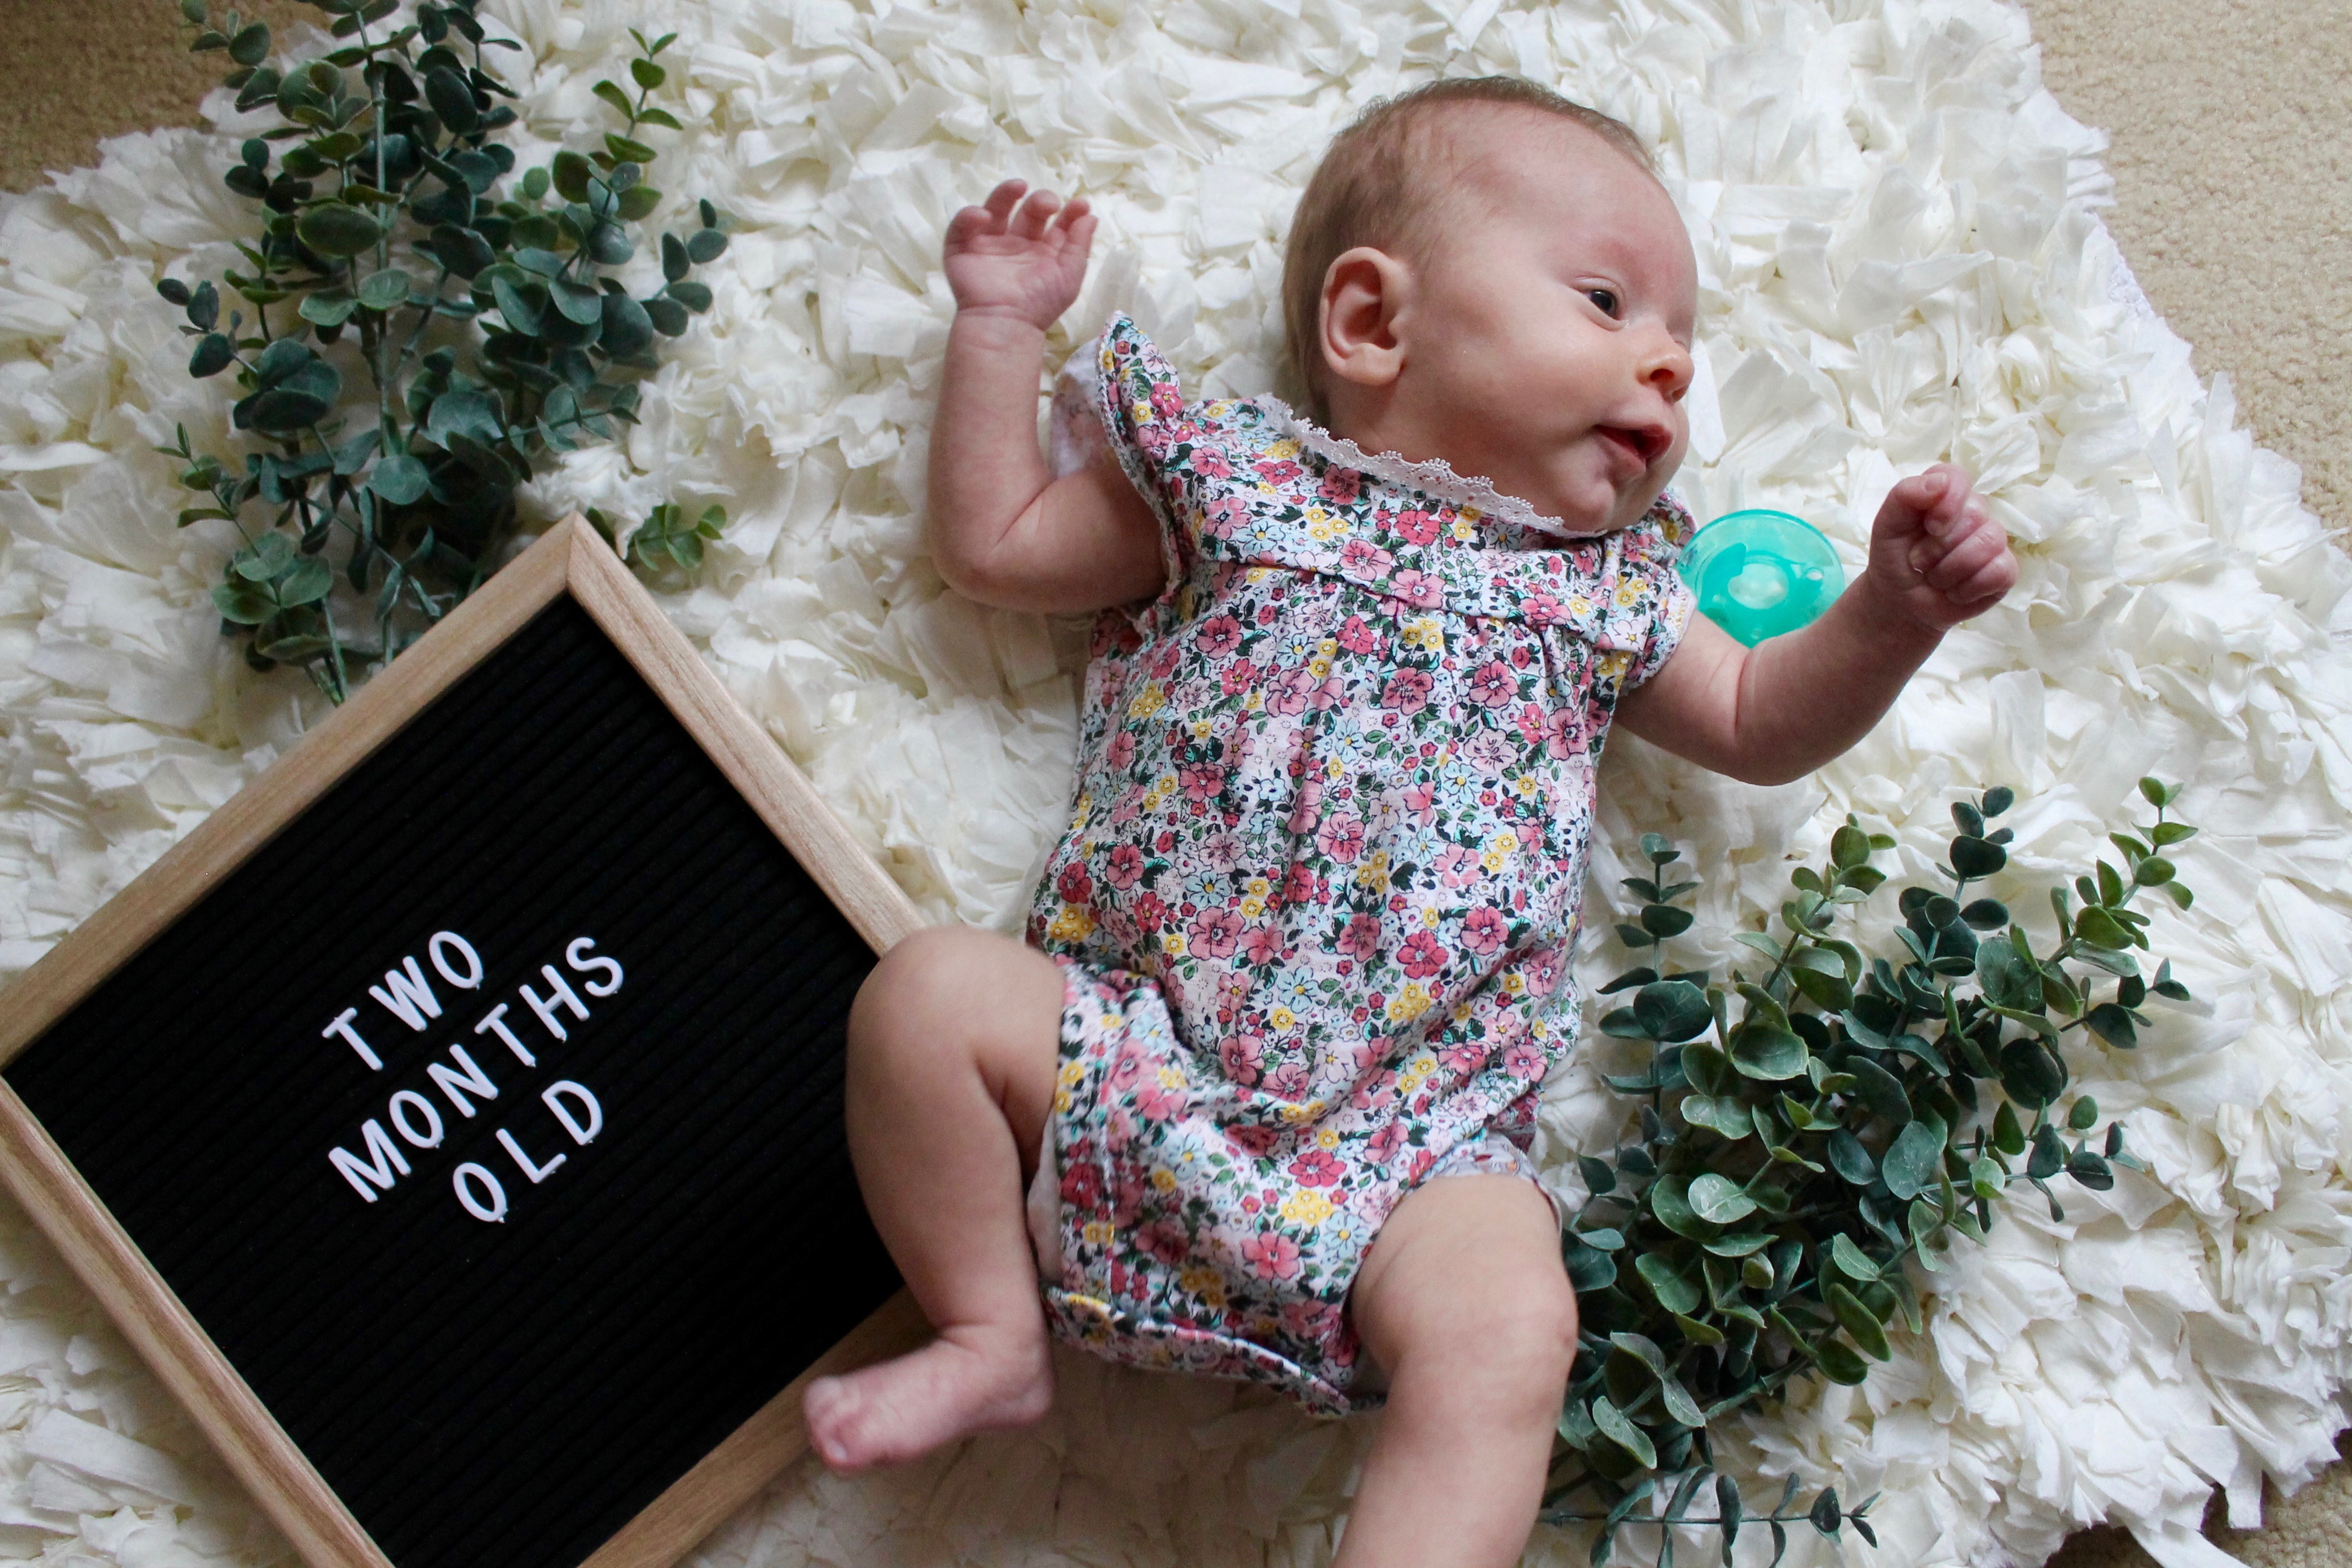 Baby Update: Sloane at Two Months